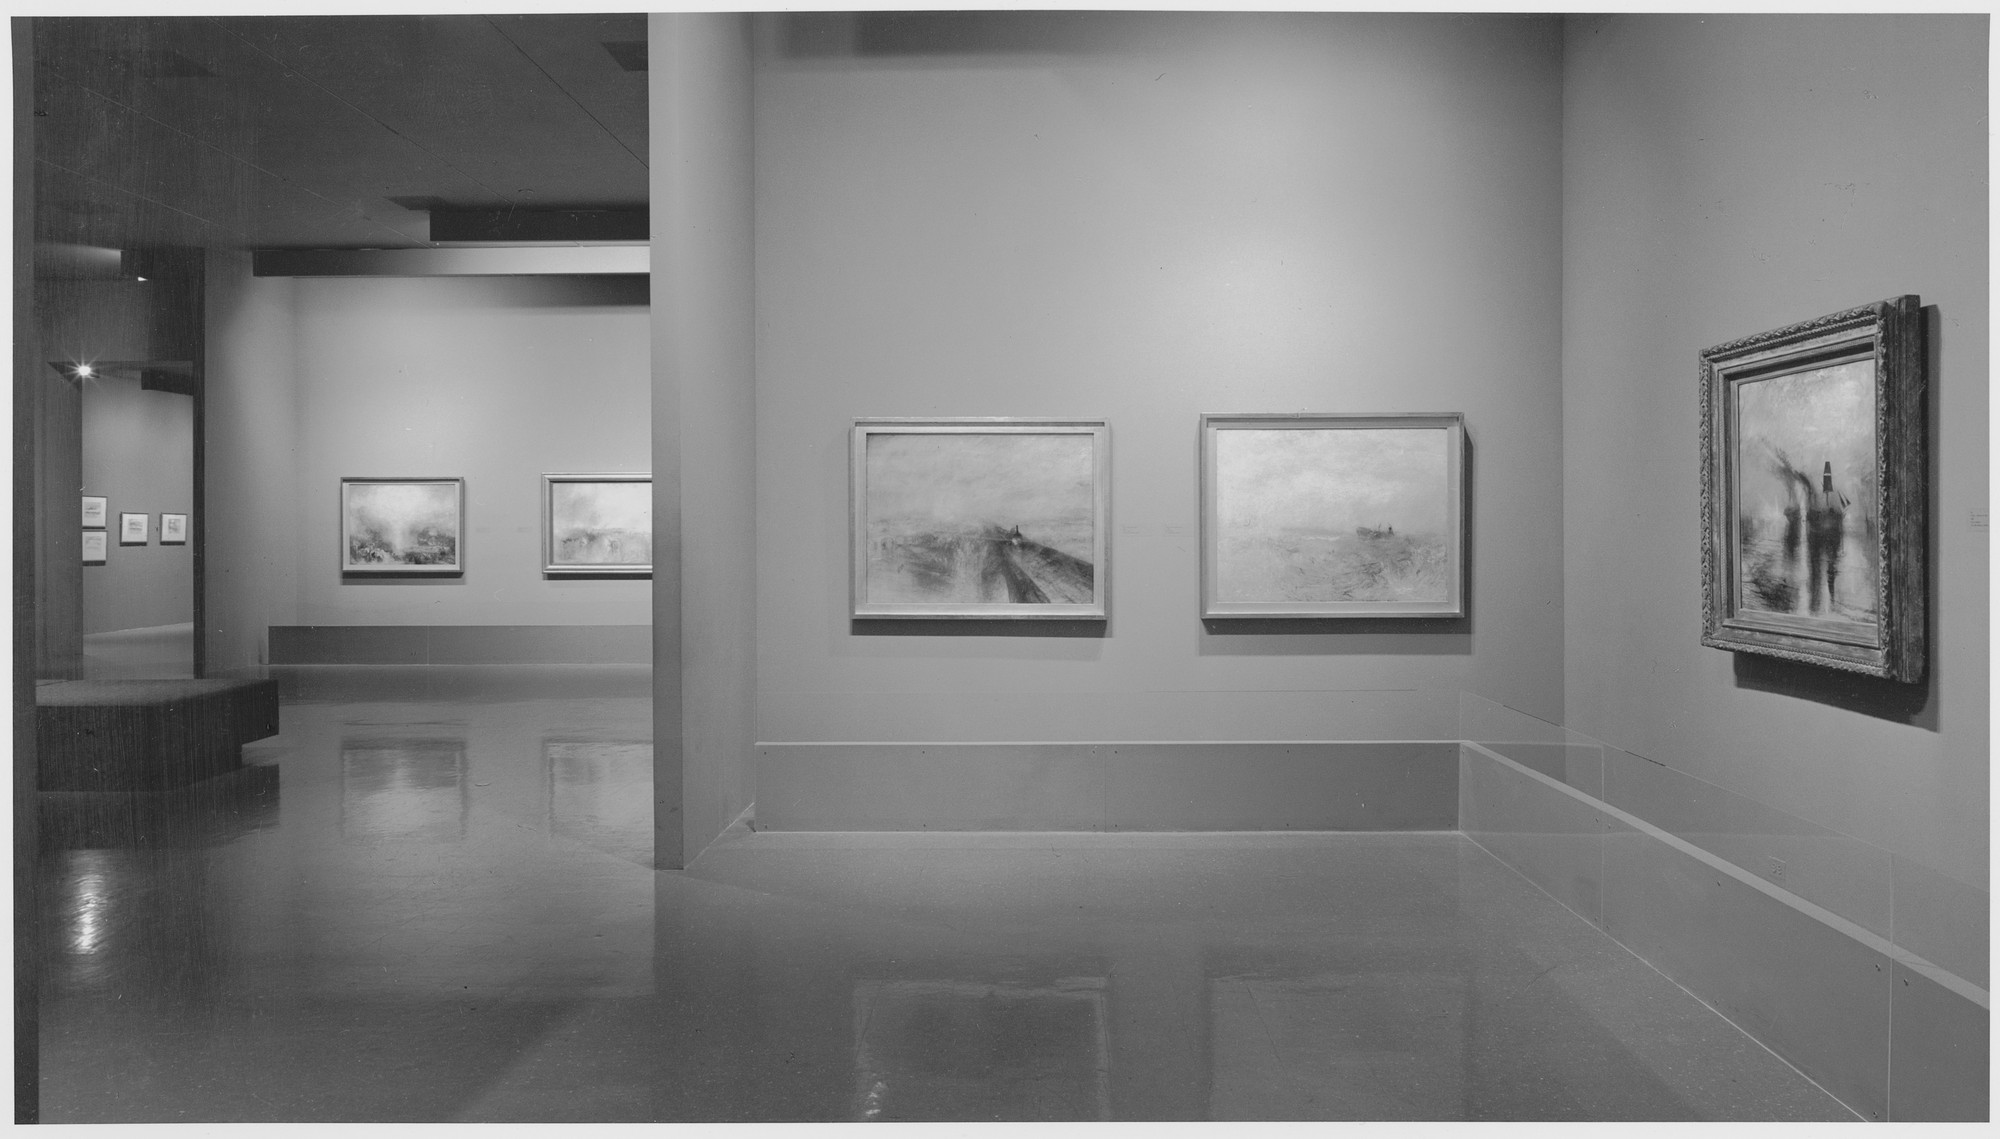 Installation view of the exhibition "Turner Imagination and Reality